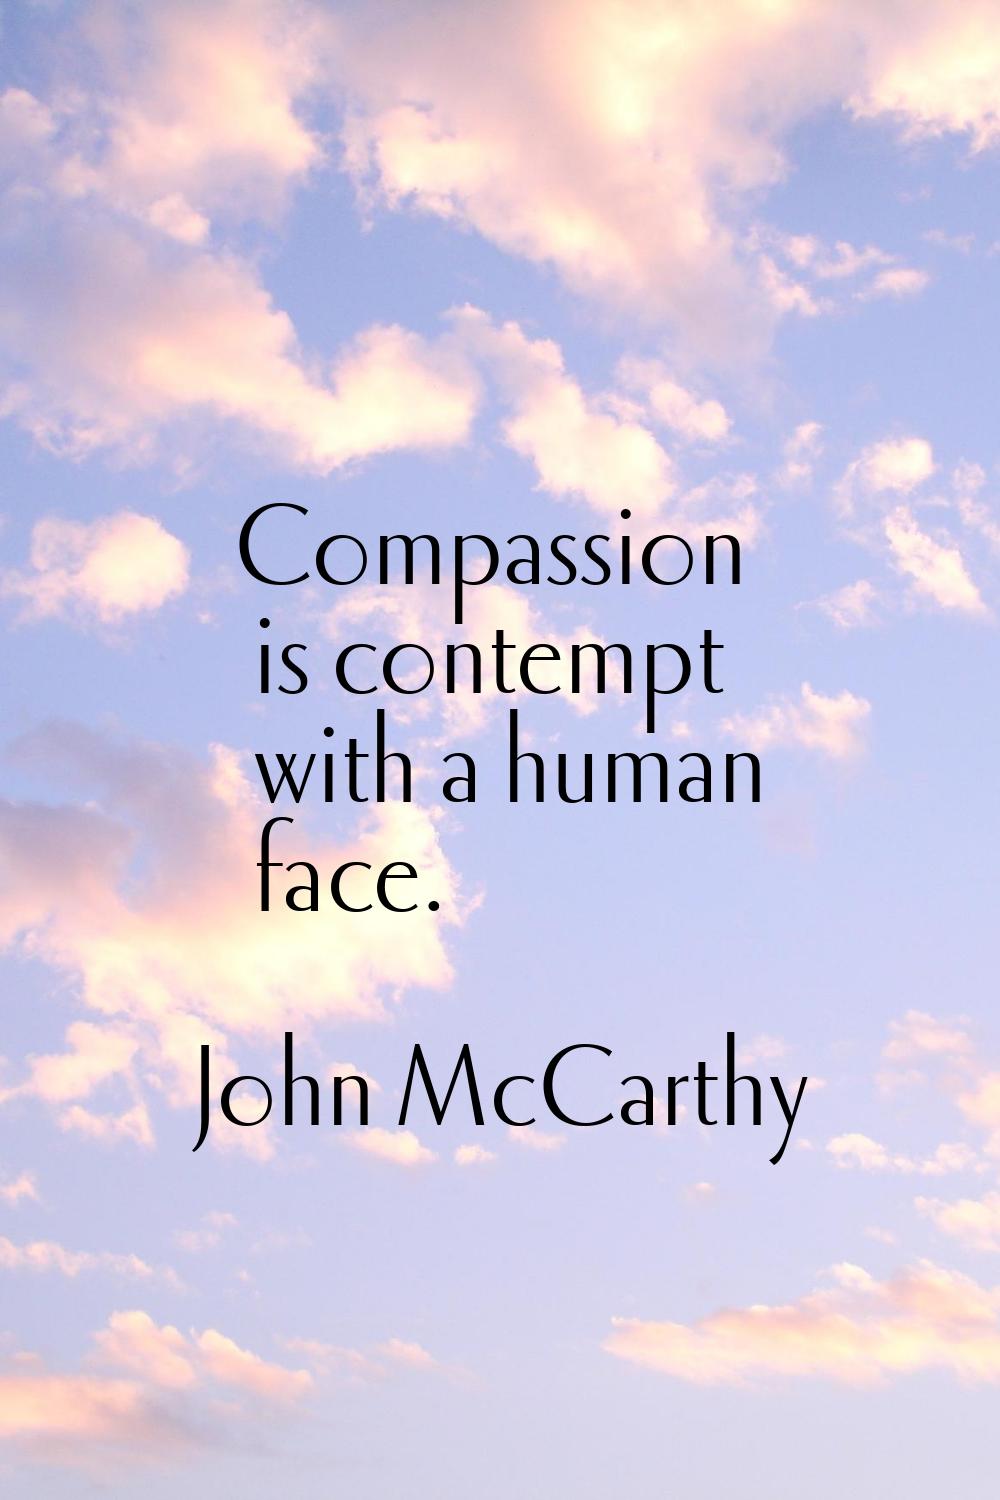 Compassion is contempt with a human face.